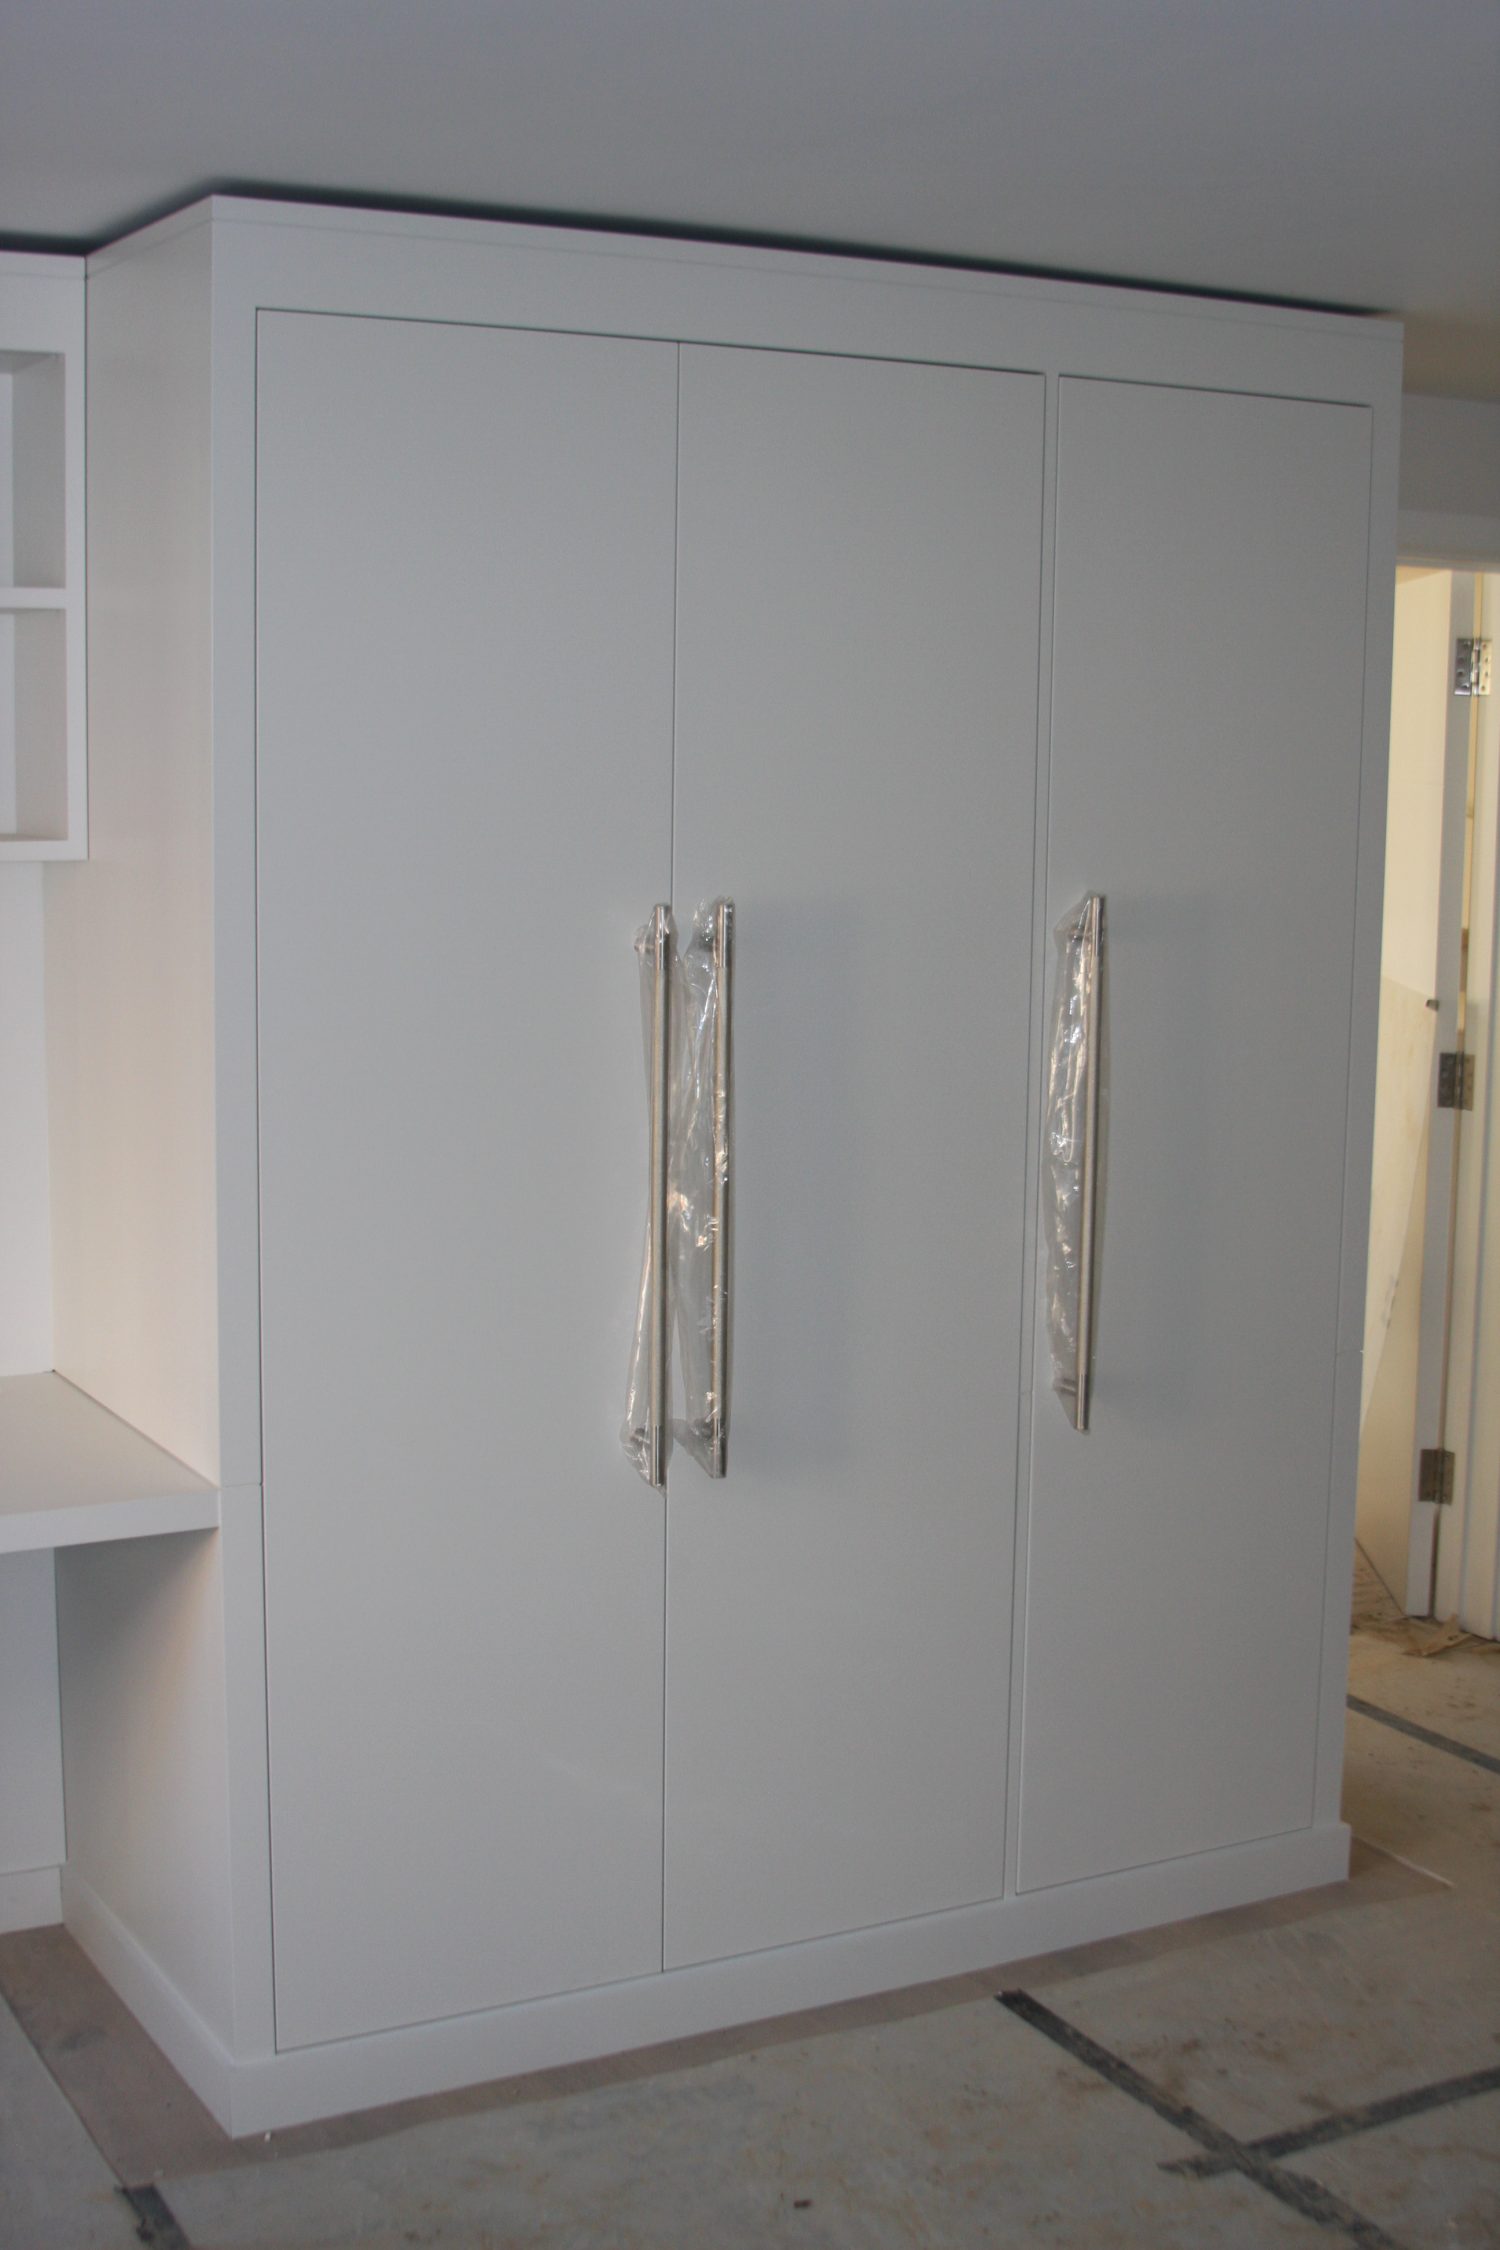 Other End of Worktop with Further Storage Cupboard